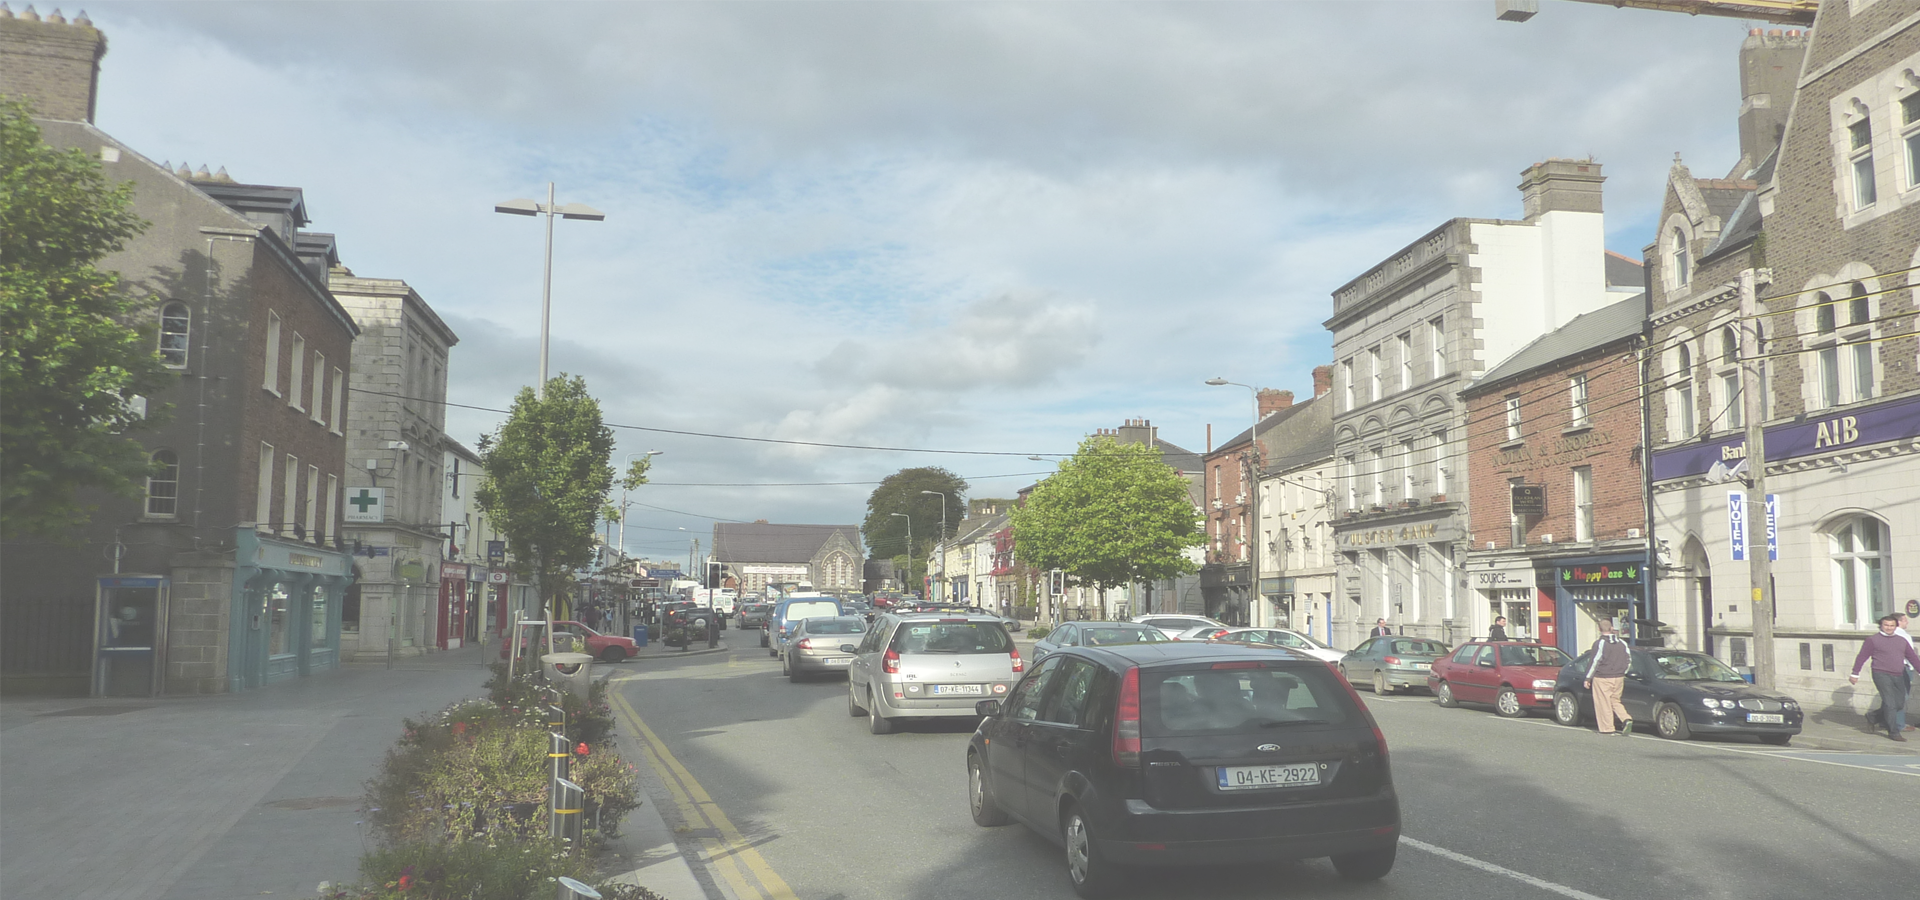 <b>Naas, County Kildare, The Province of Leinster, Ireland</b>